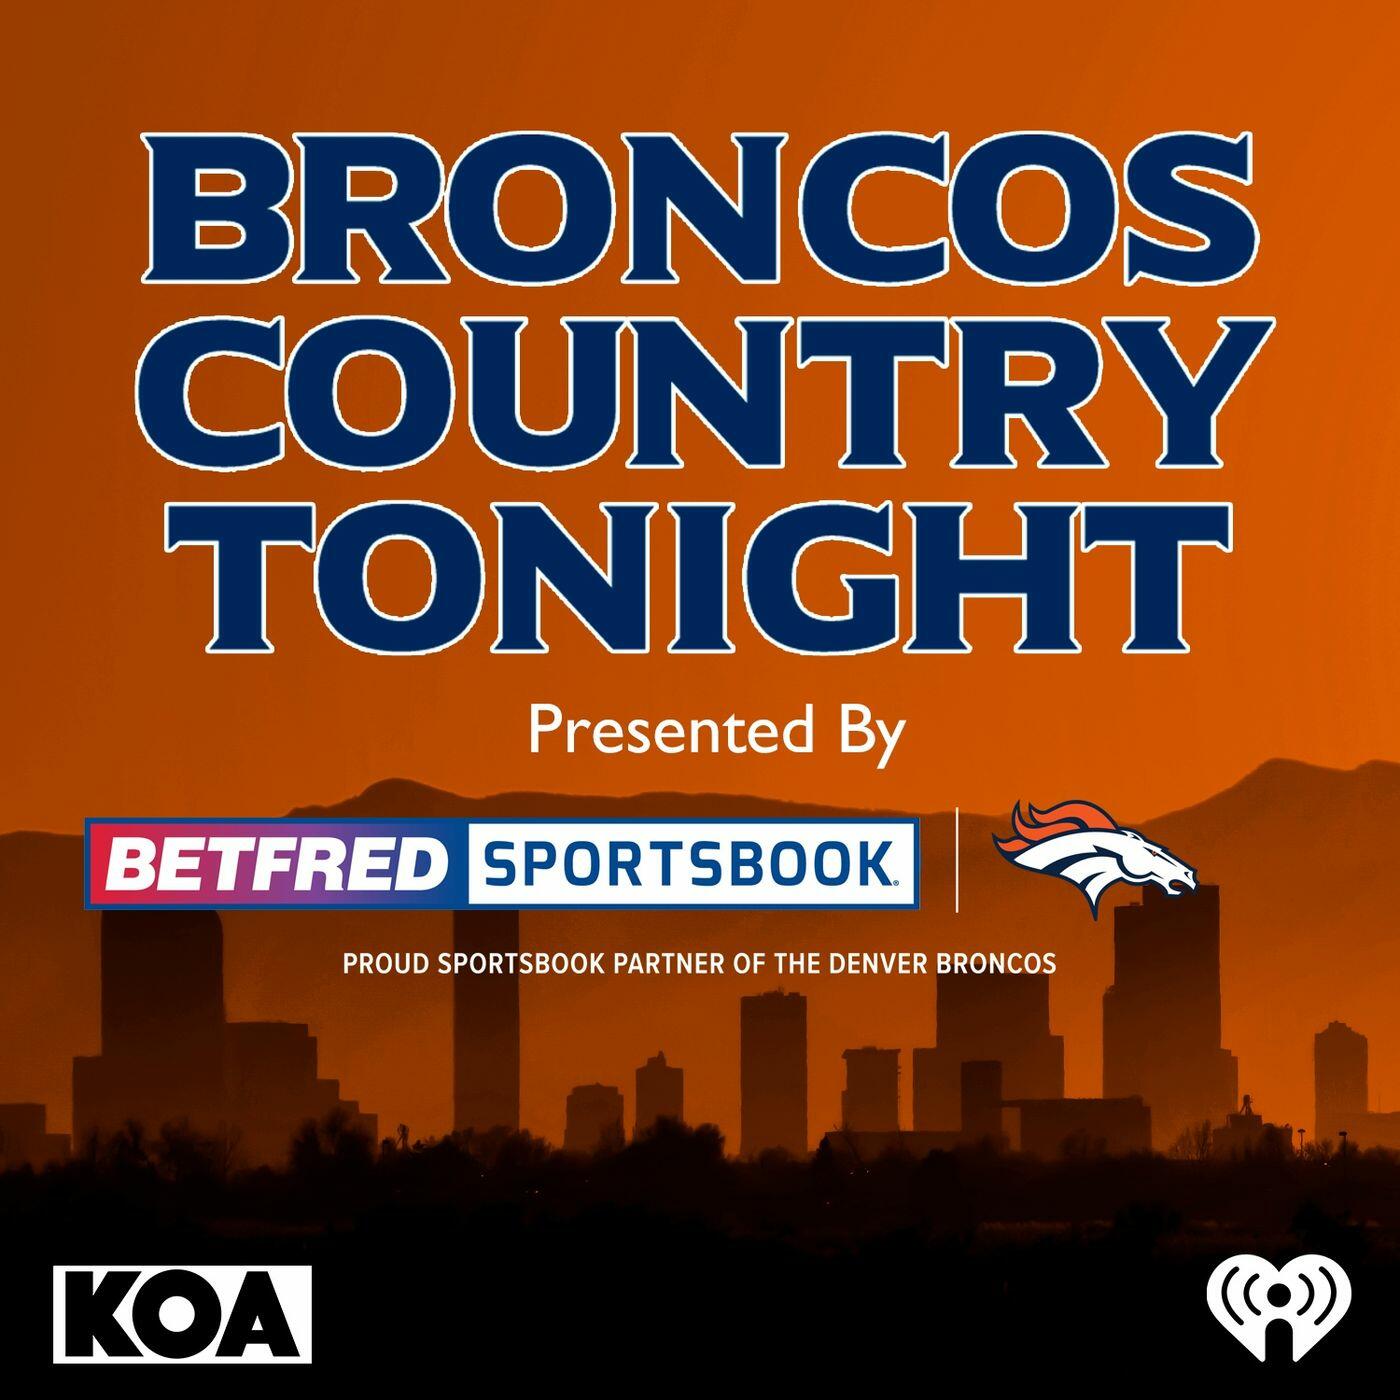 what channel is the denver broncos on tonight